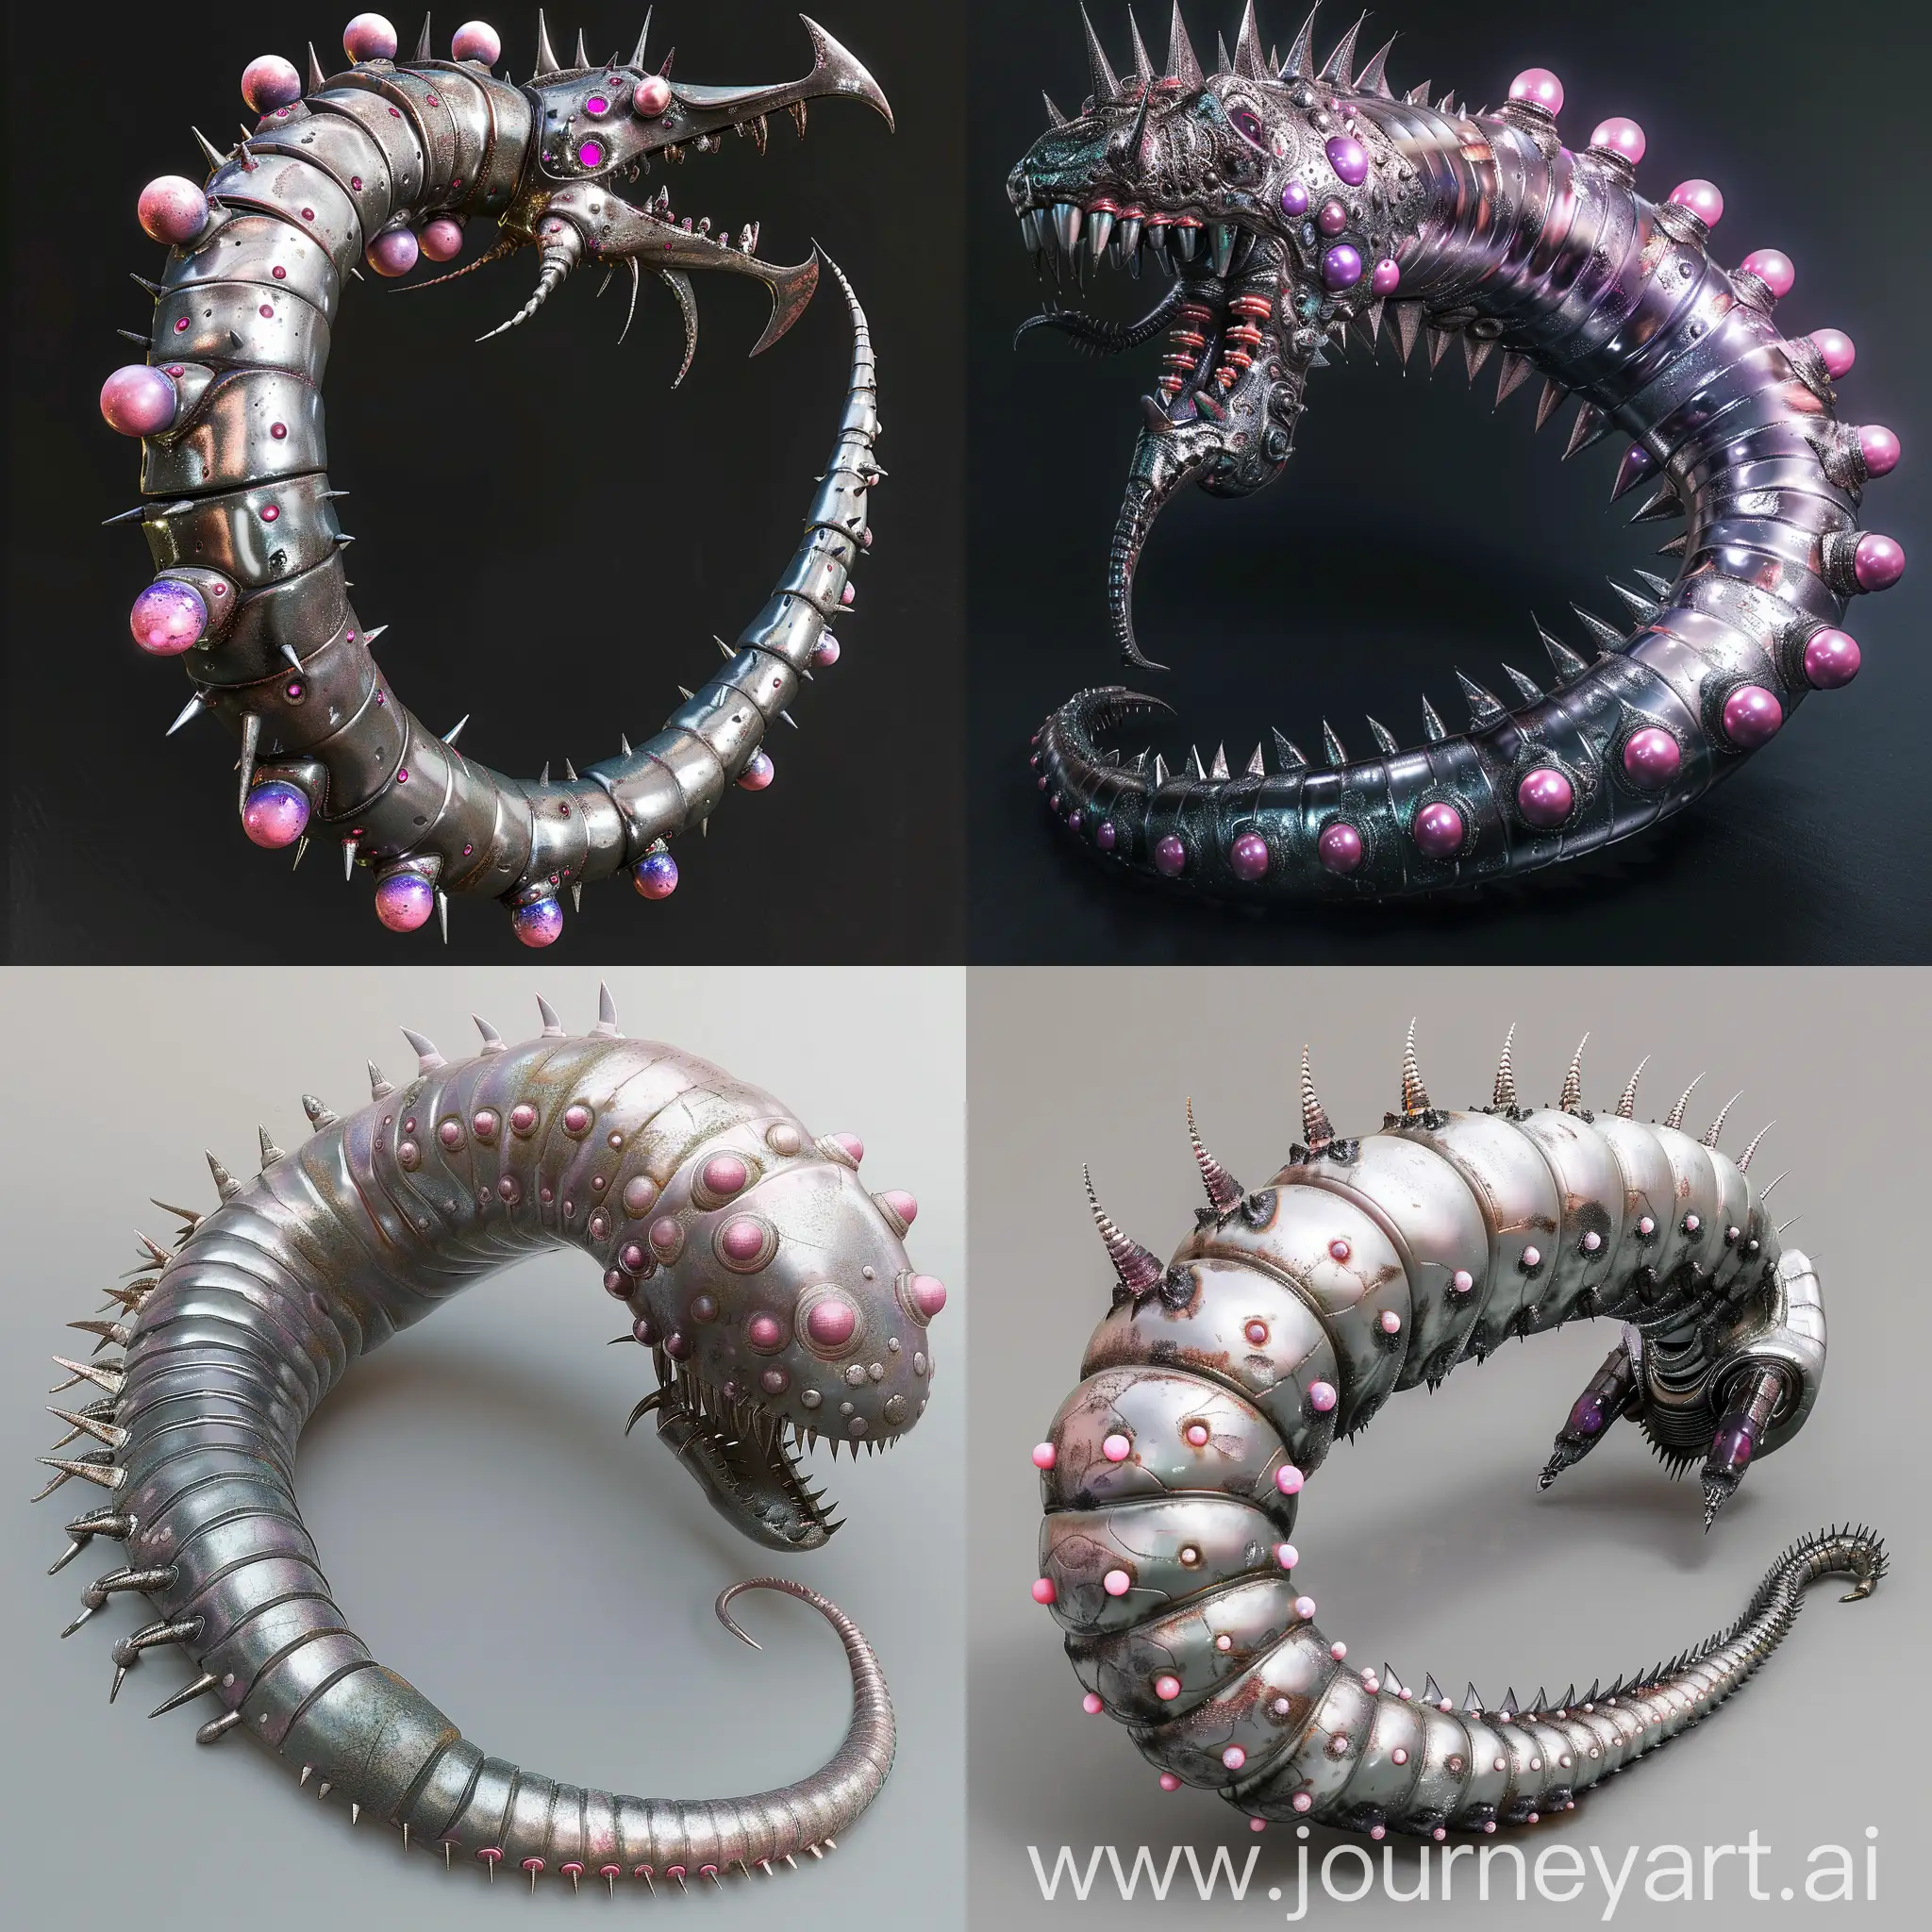 Gigantic-Metallic-Worm-with-Spiked-Silvery-Body-and-Pink-Spheres